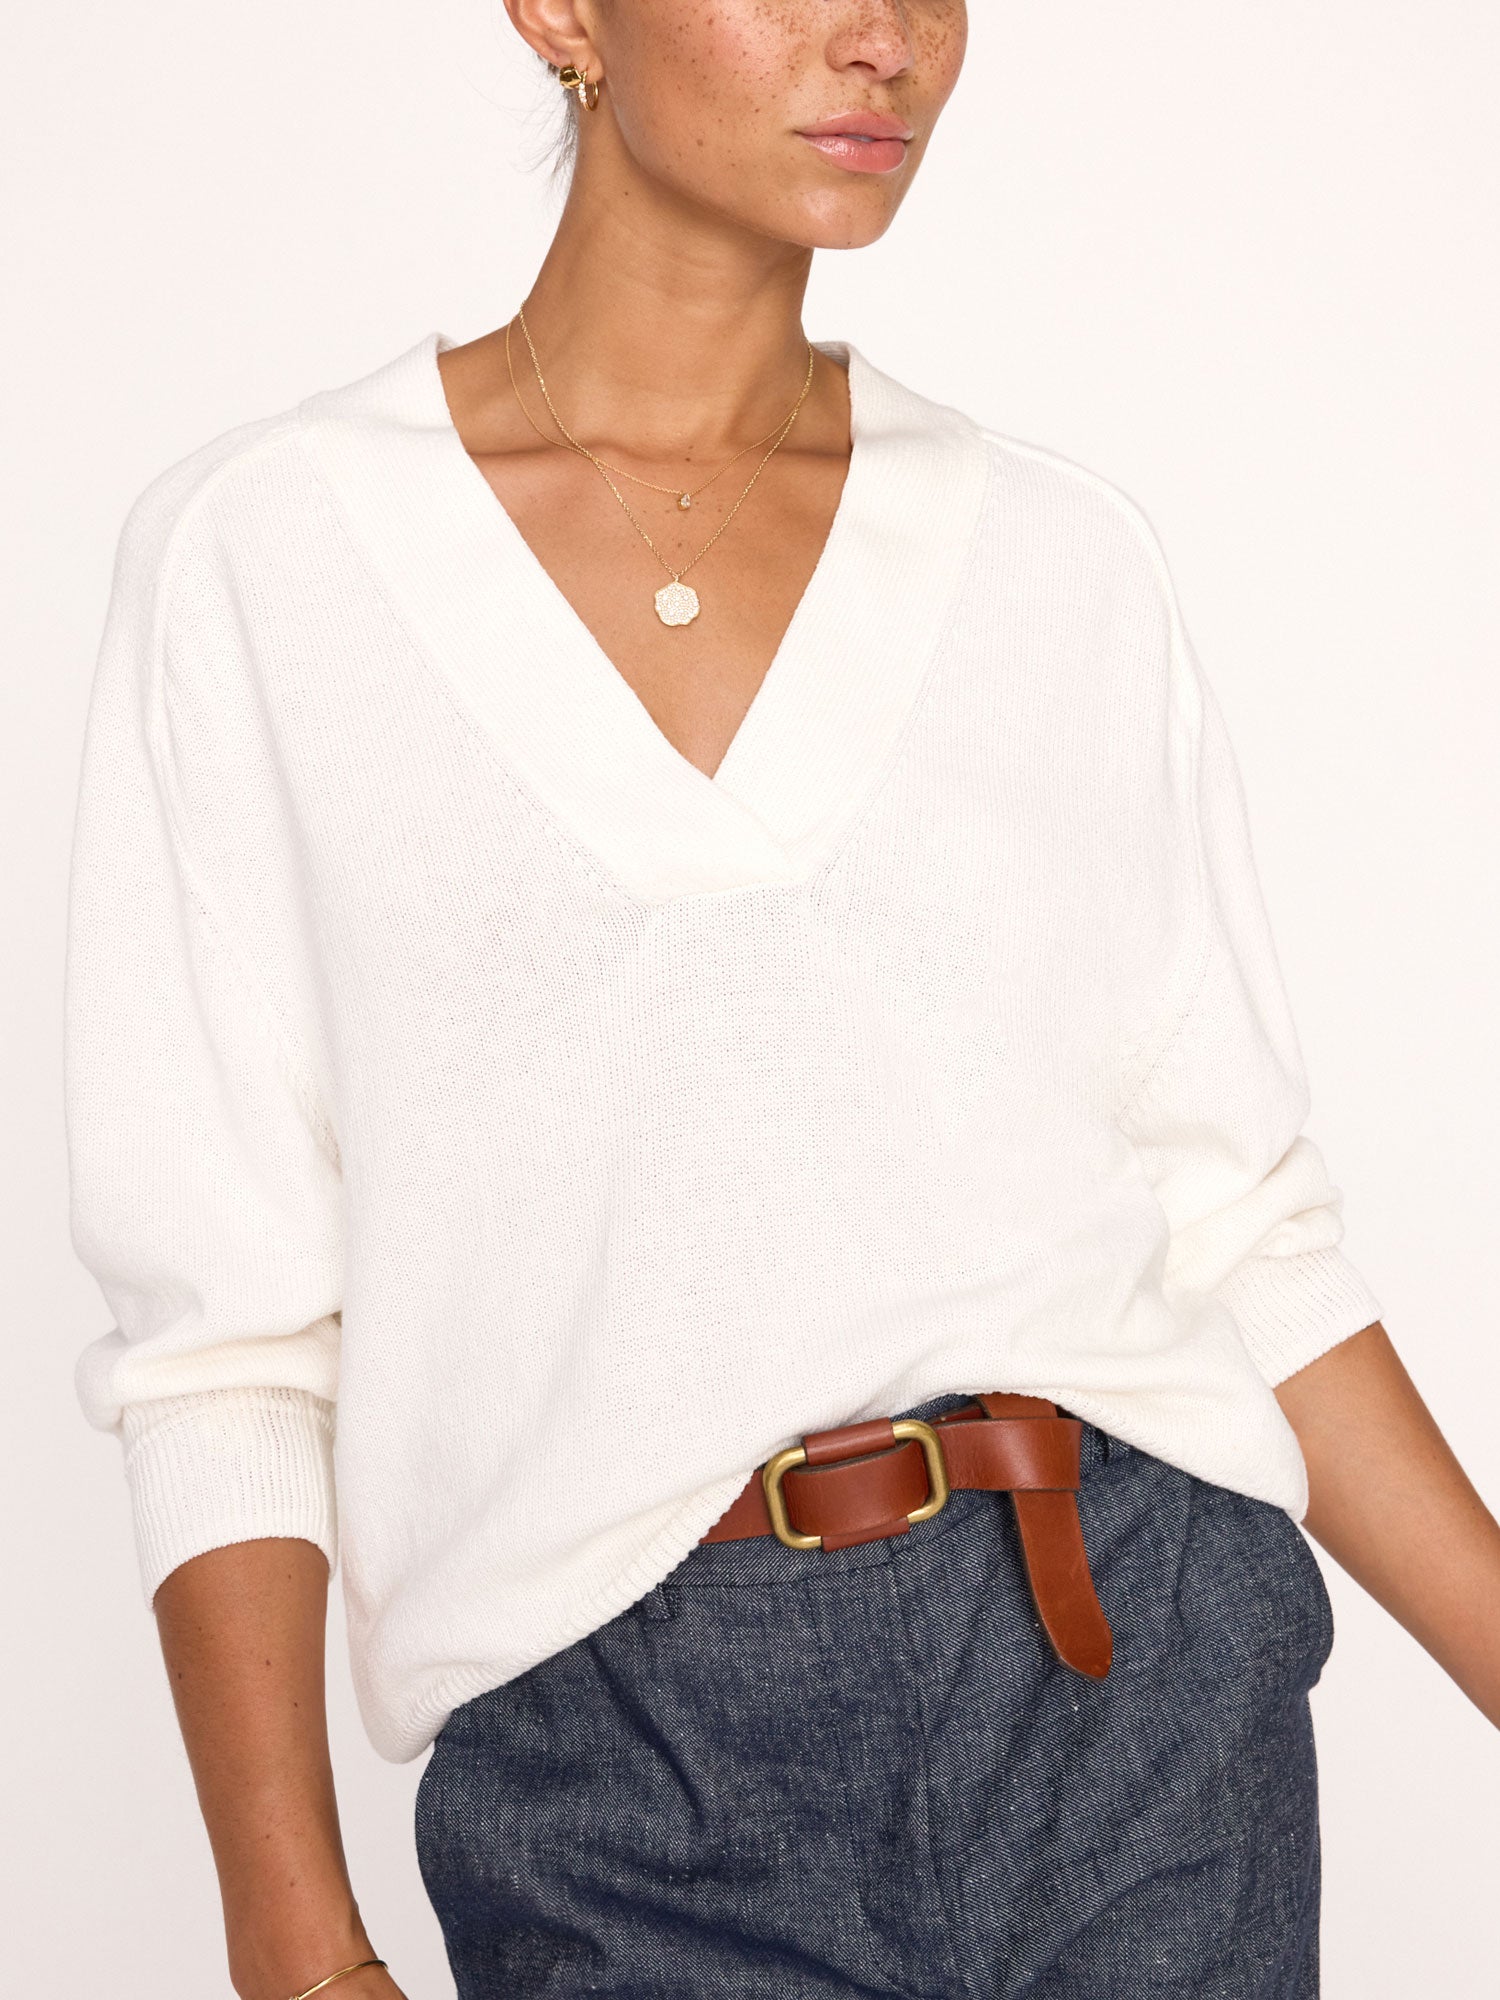 Imogen V-neck cotton white sweater front view